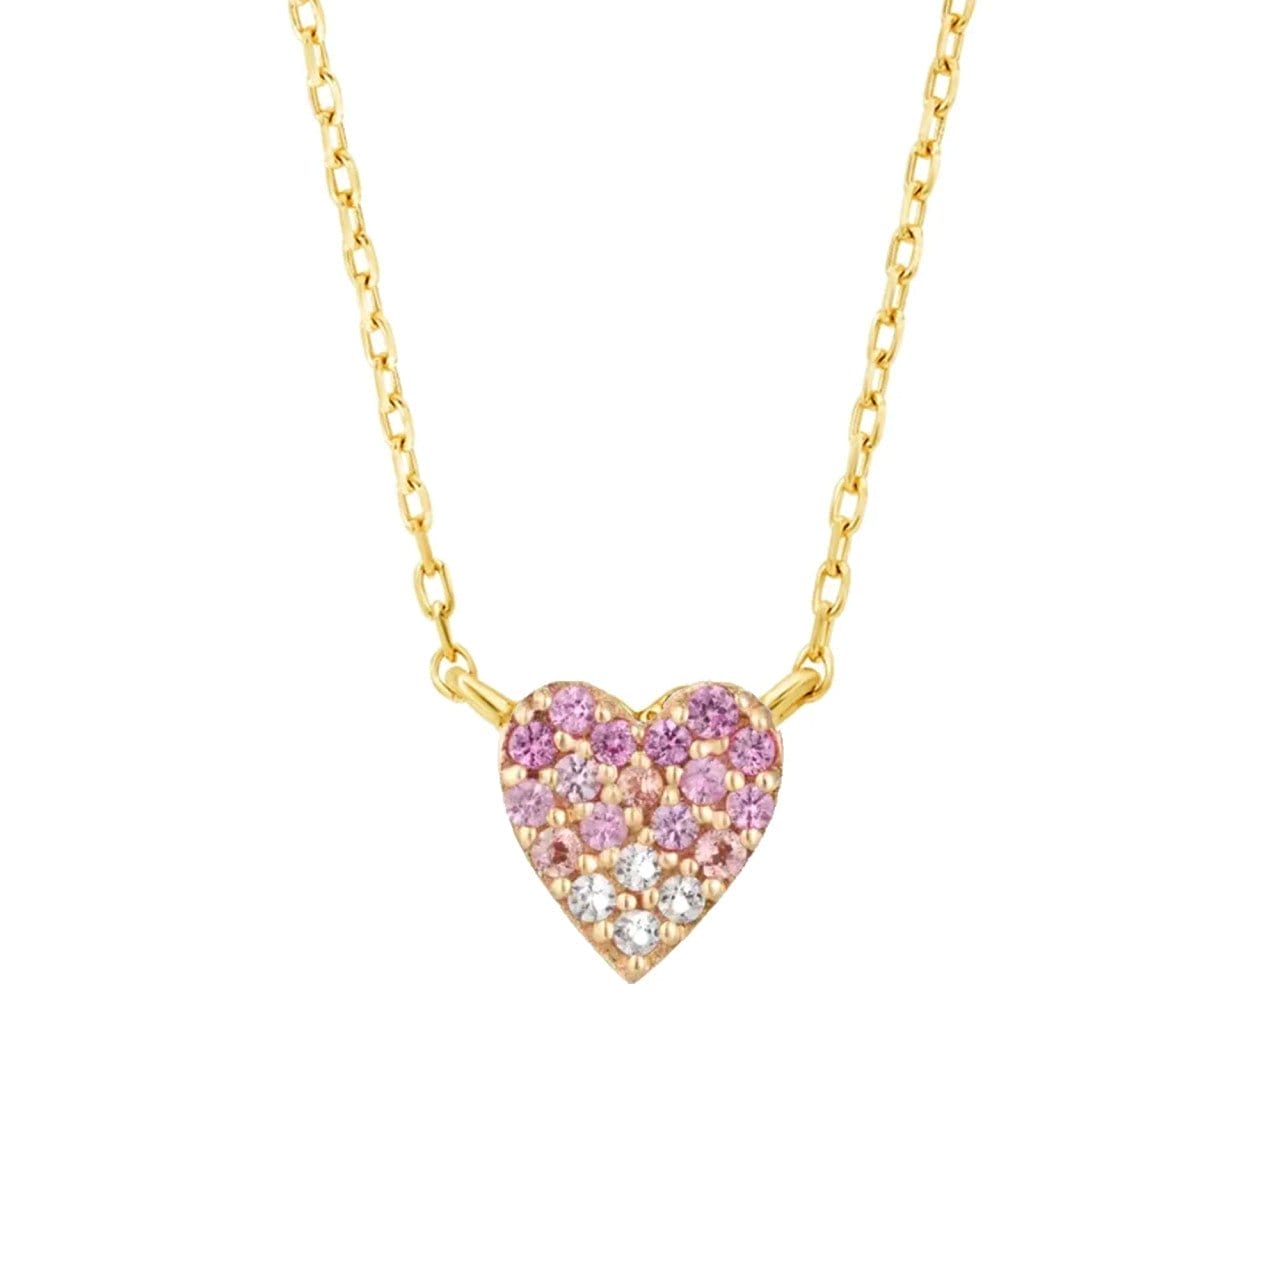 Image of La Kaiser 14K Yellow Gold Pink Sapphire Heart Necklace